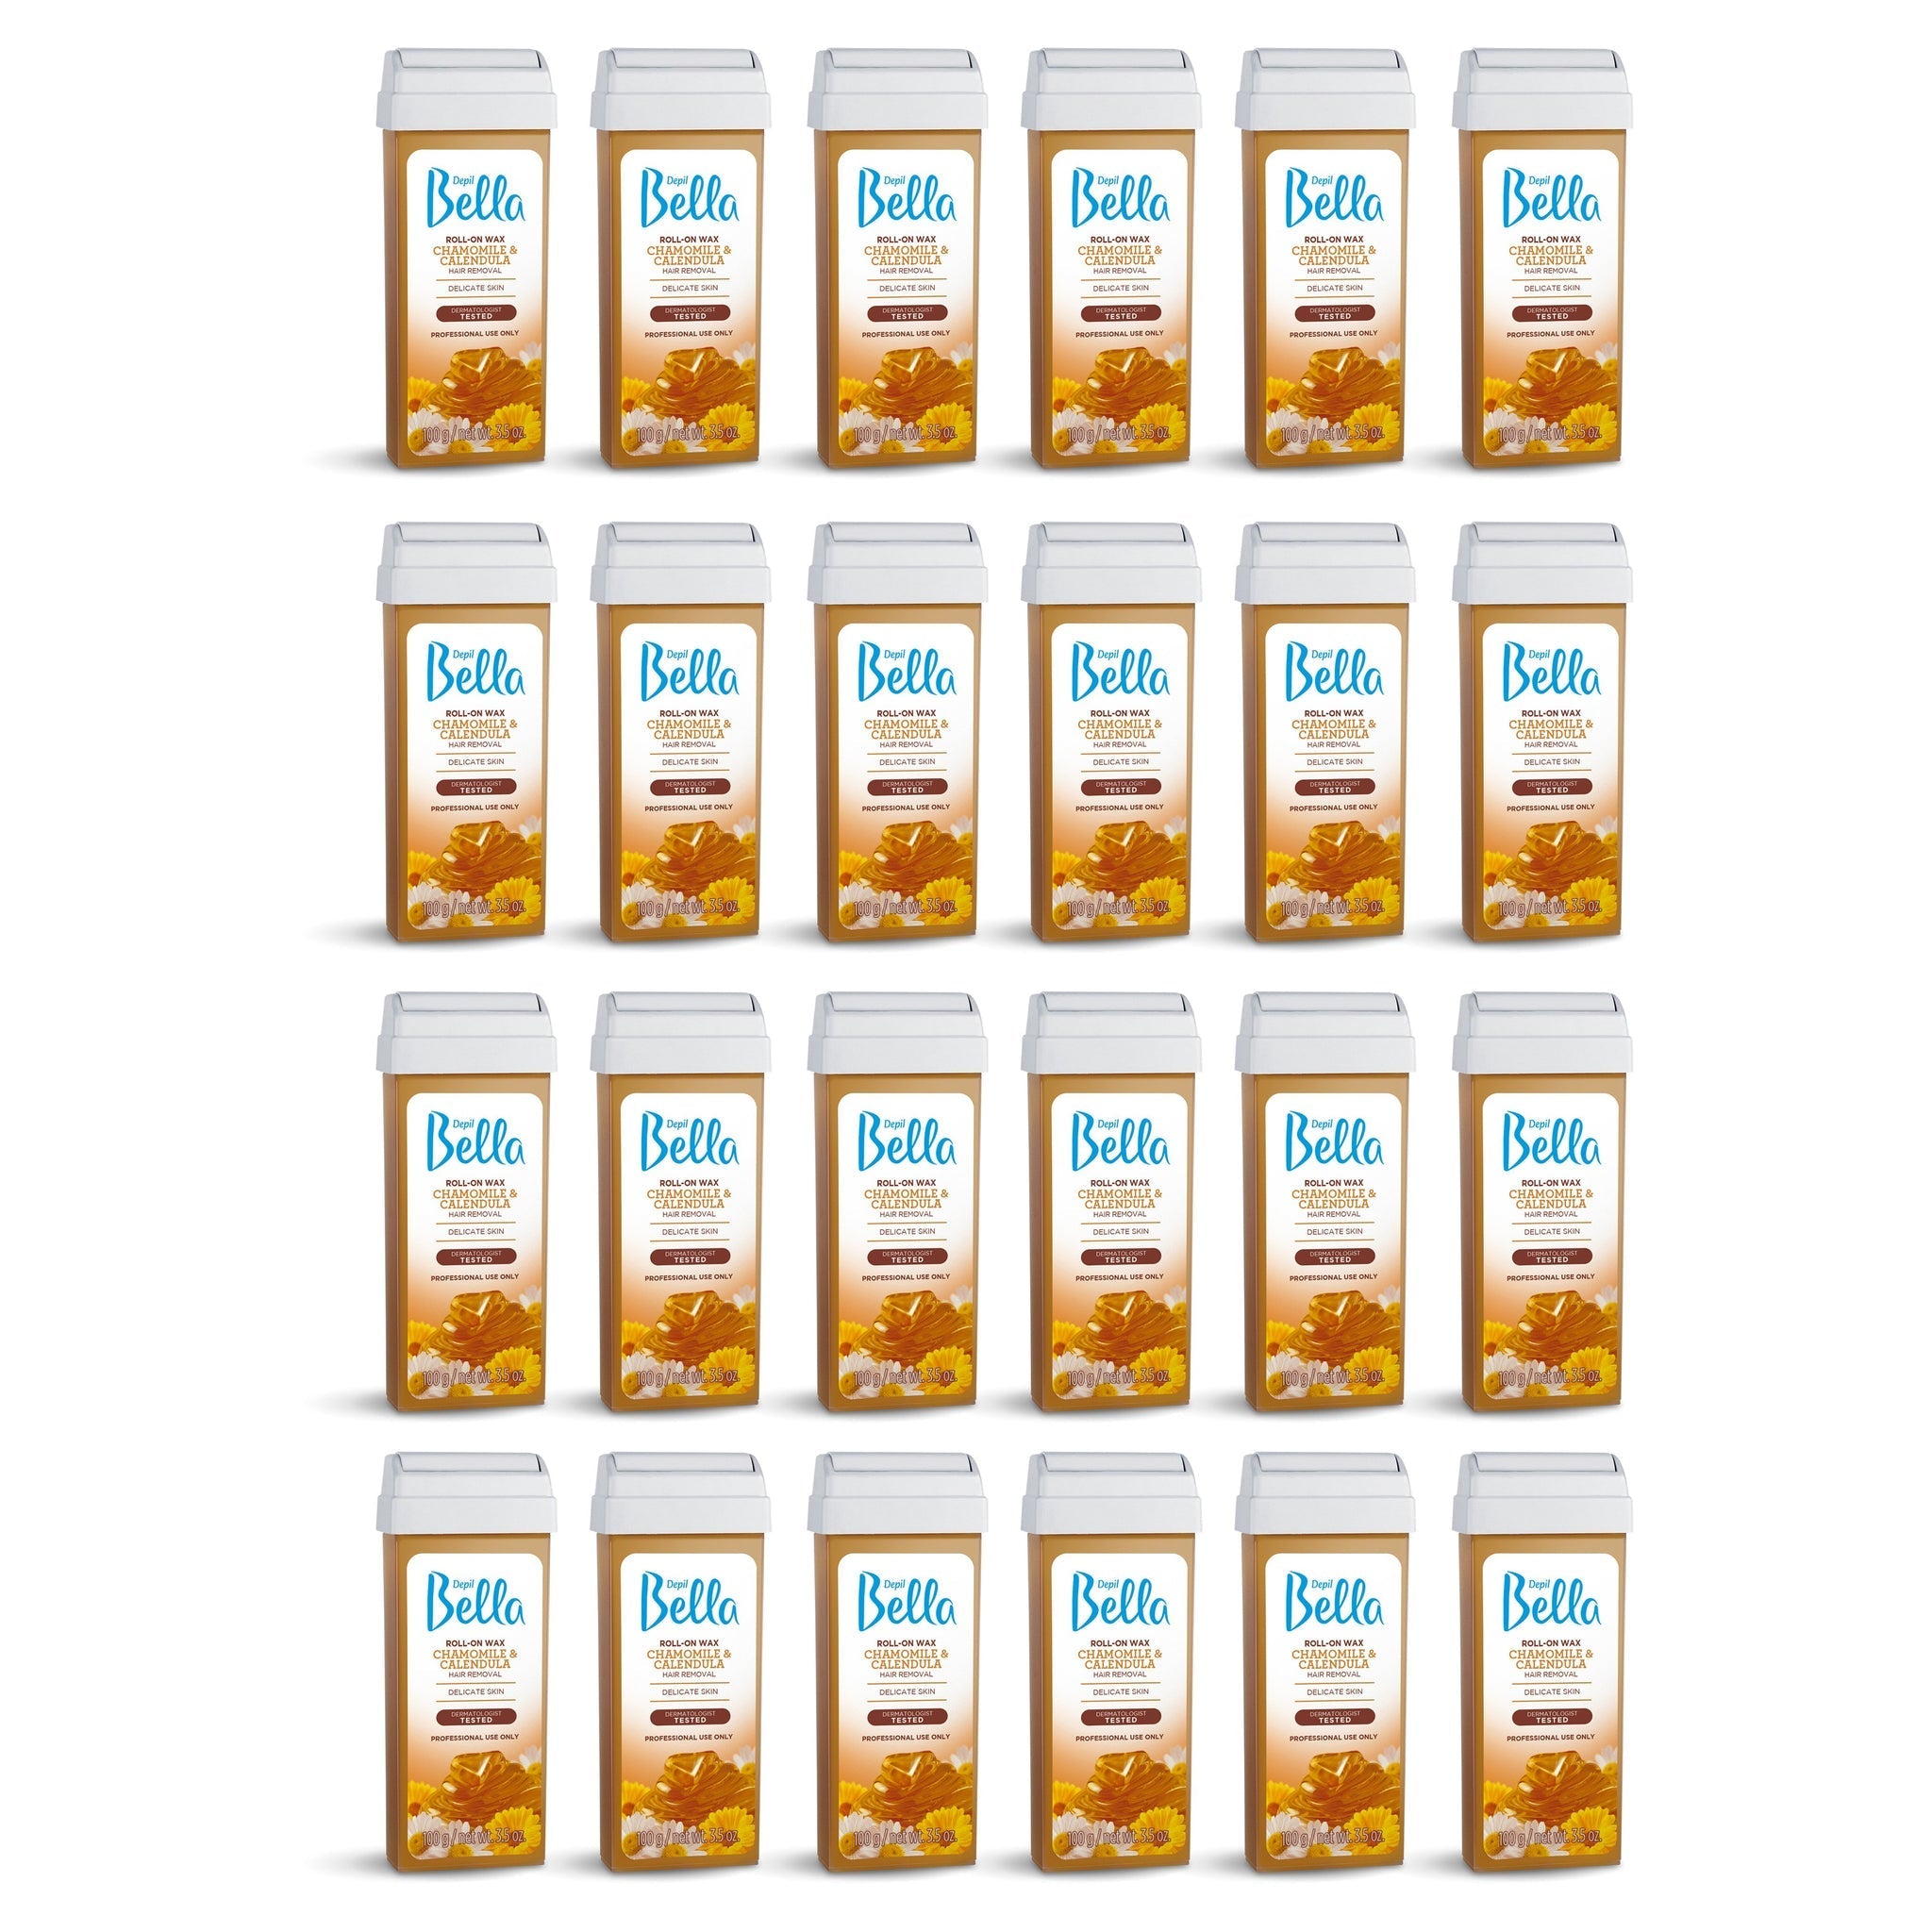 Depil Bella Hair Removal Wax Depil Bella Roll on Chamomile and Calendula Wax Hair Removal Cartridges 3.52 Oz (120 Units )